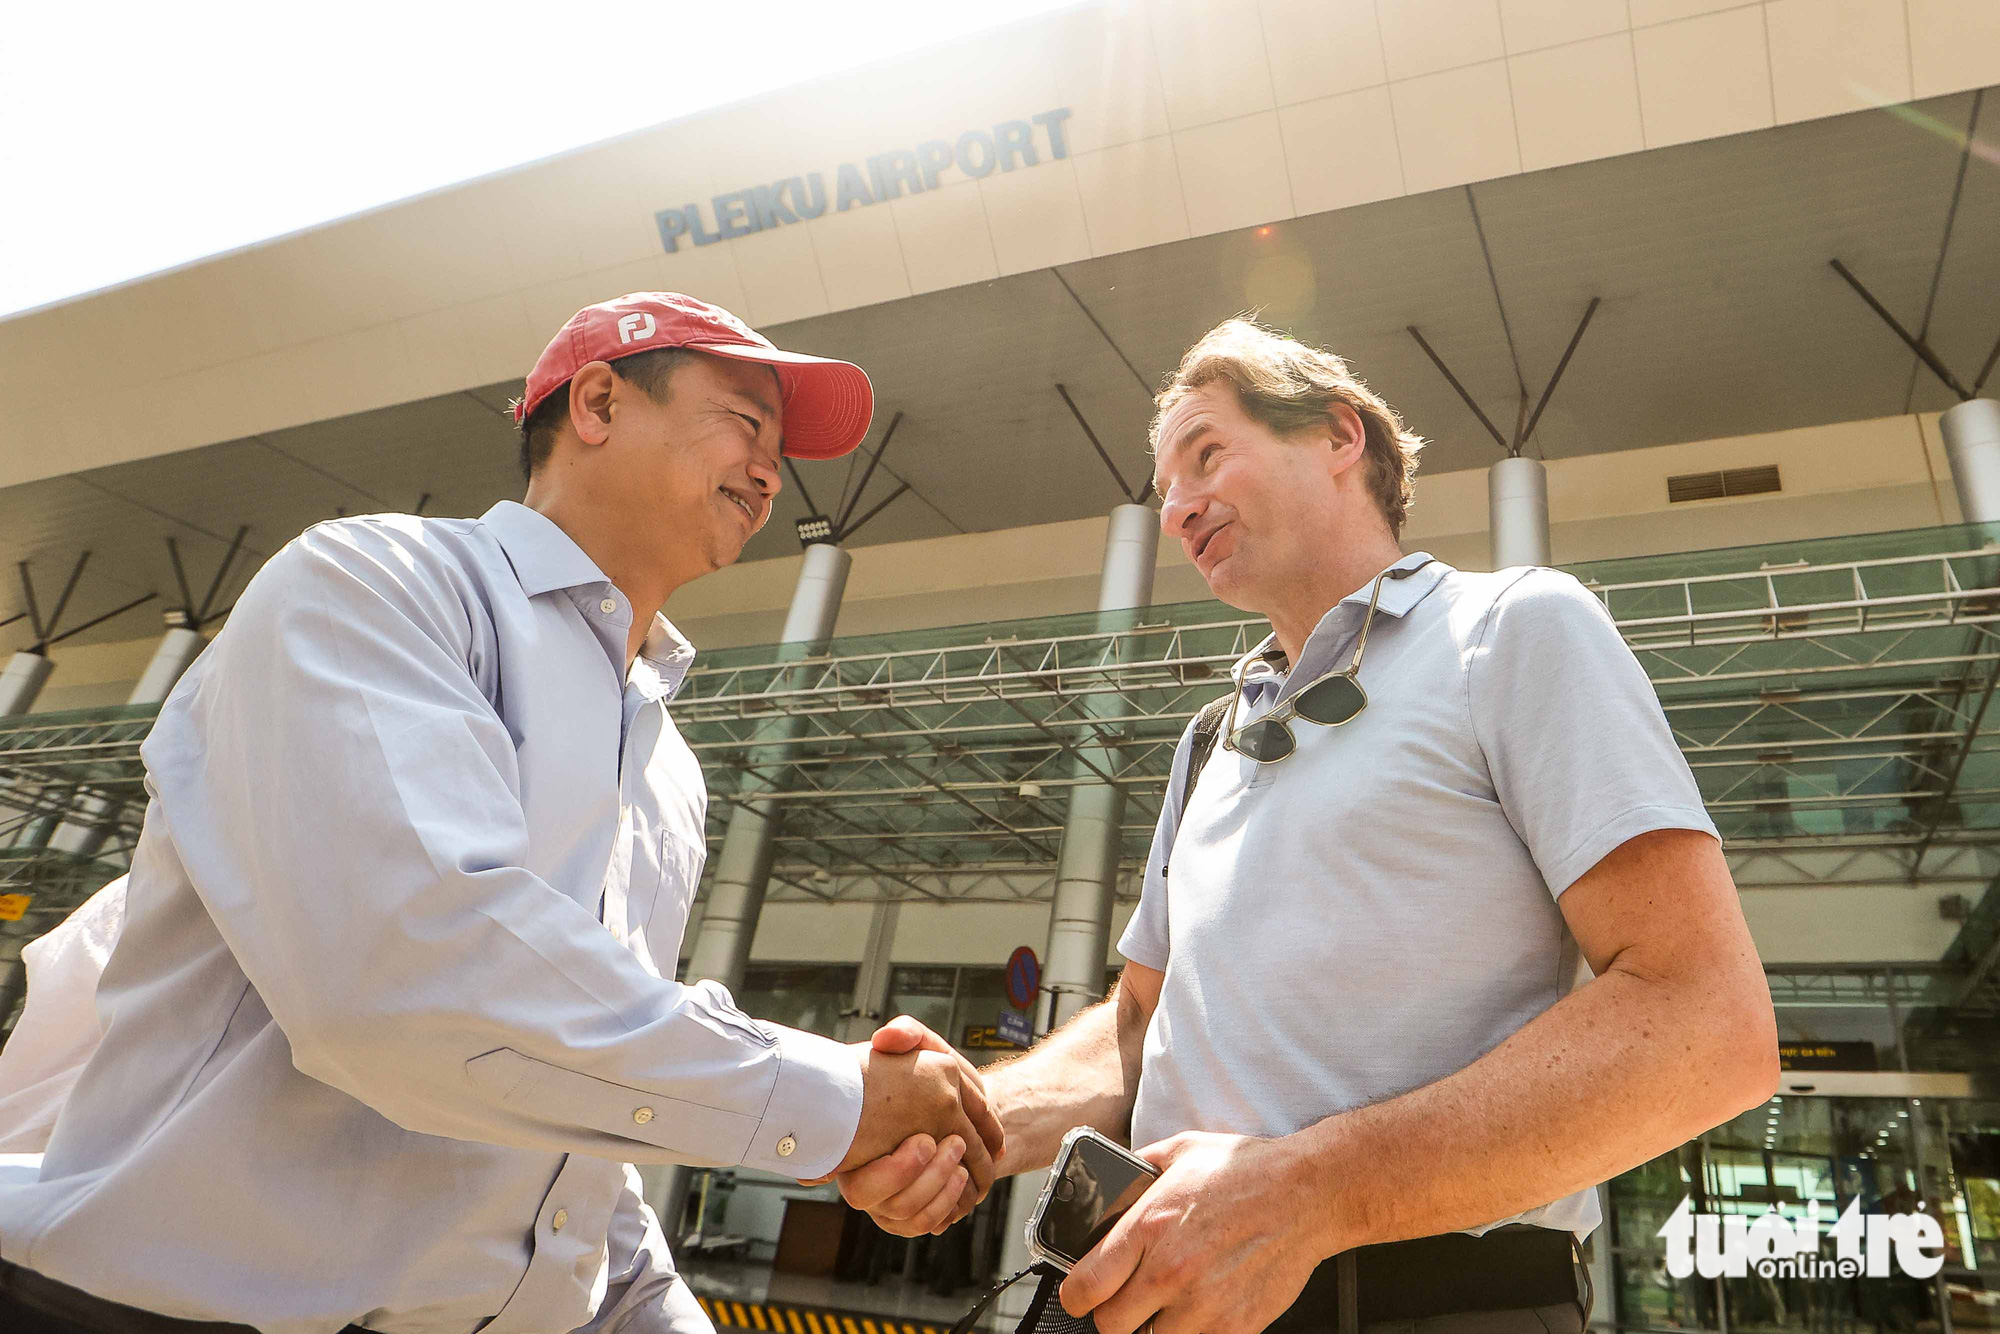 Dean Phillips (R) shakes hands with Le Cong Tien, deputy head of the Americas Department under the Vietnamese Ministry of Foreign Affairs, after landing the Pleiku Airport in the Central Highlands province of Gia Lai. Photo: Nguyen Khanh / Tuoi Tre